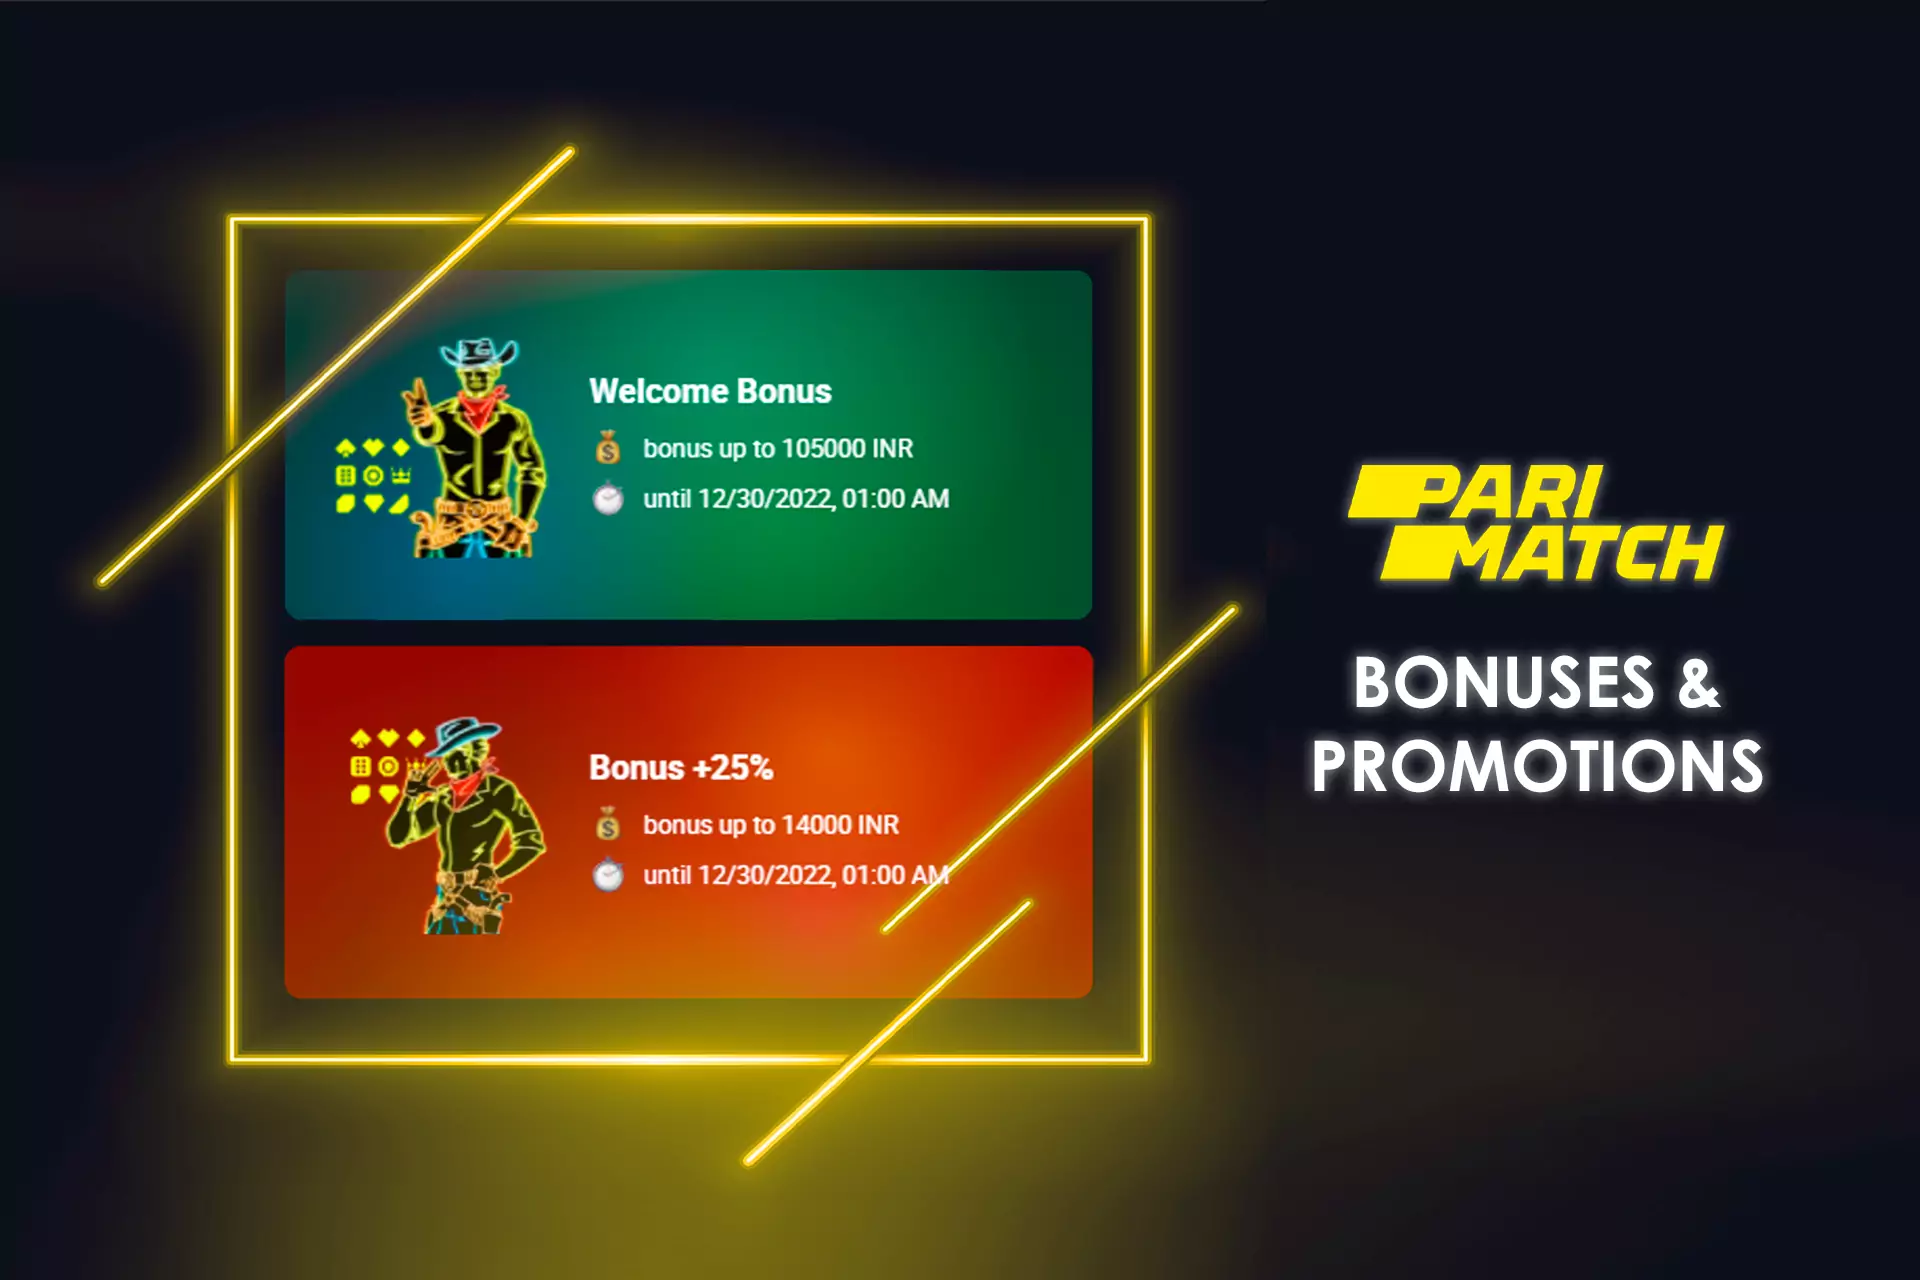 For new users, there is a welcome offer at the Parimatch Casino.